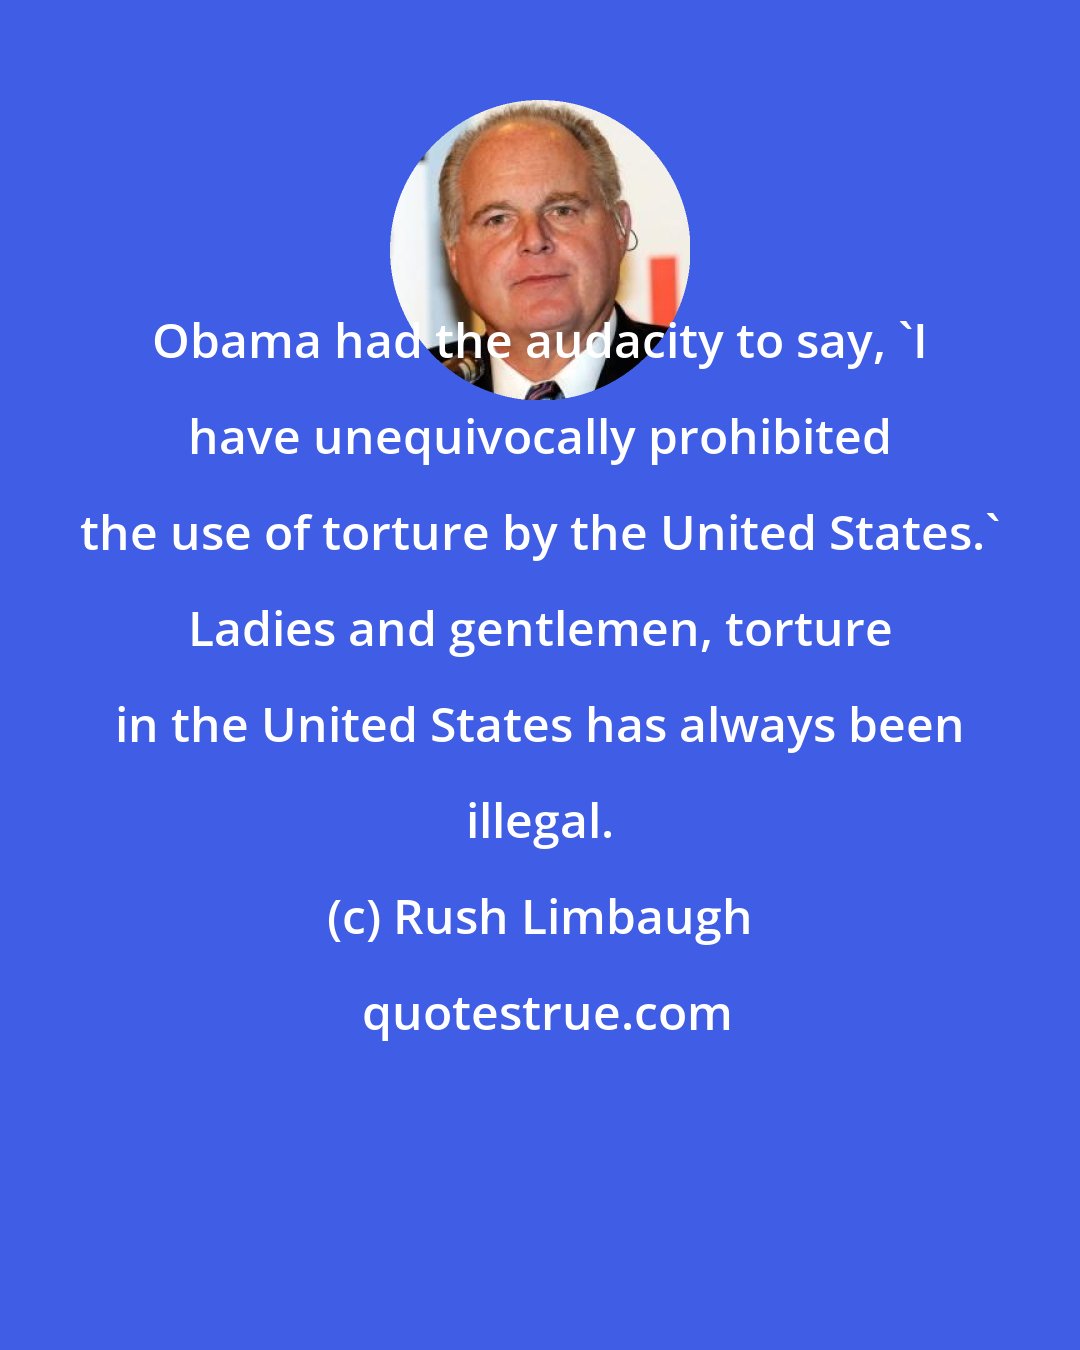 Rush Limbaugh: Obama had the audacity to say, 'I have unequivocally prohibited the use of torture by the United States.' Ladies and gentlemen, torture in the United States has always been illegal.